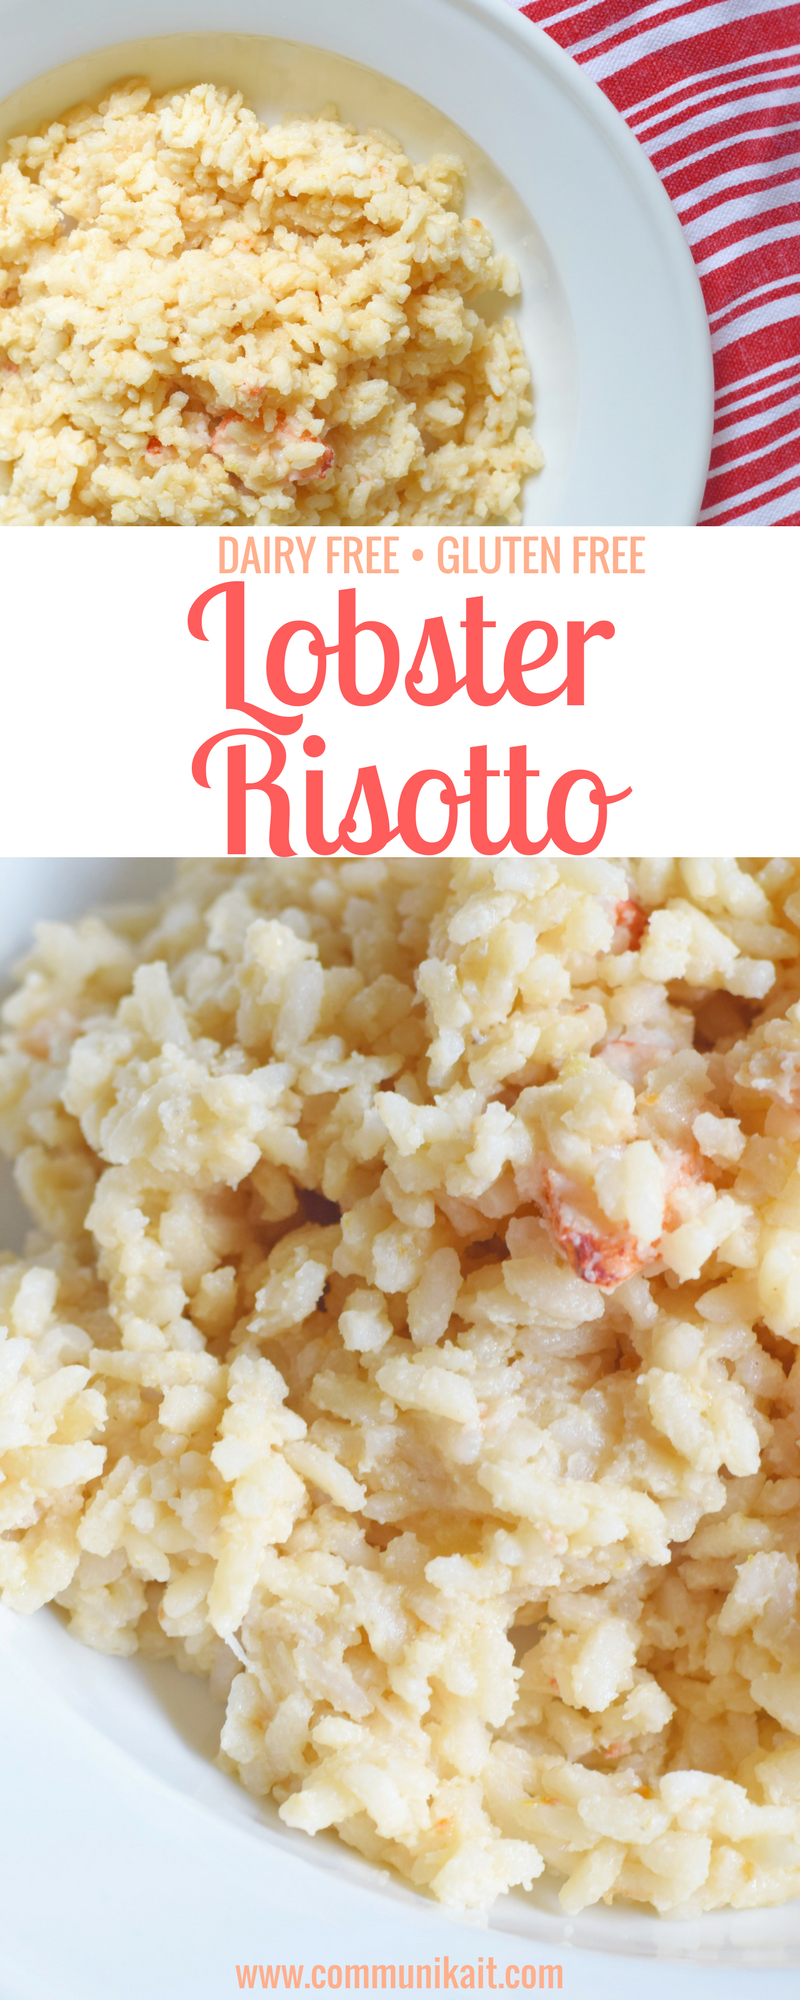 Dairy Free Lobster Risotto - Seafood Risotto Recipe - Easy Risotto Recipe - Gluten Free Risotto - Dairy Free Dinner Idea - Lobster Risotto Recipe - Easy Risotto Ingredients - Seafood Dinner Recipe - Communikait by Kait Hanson